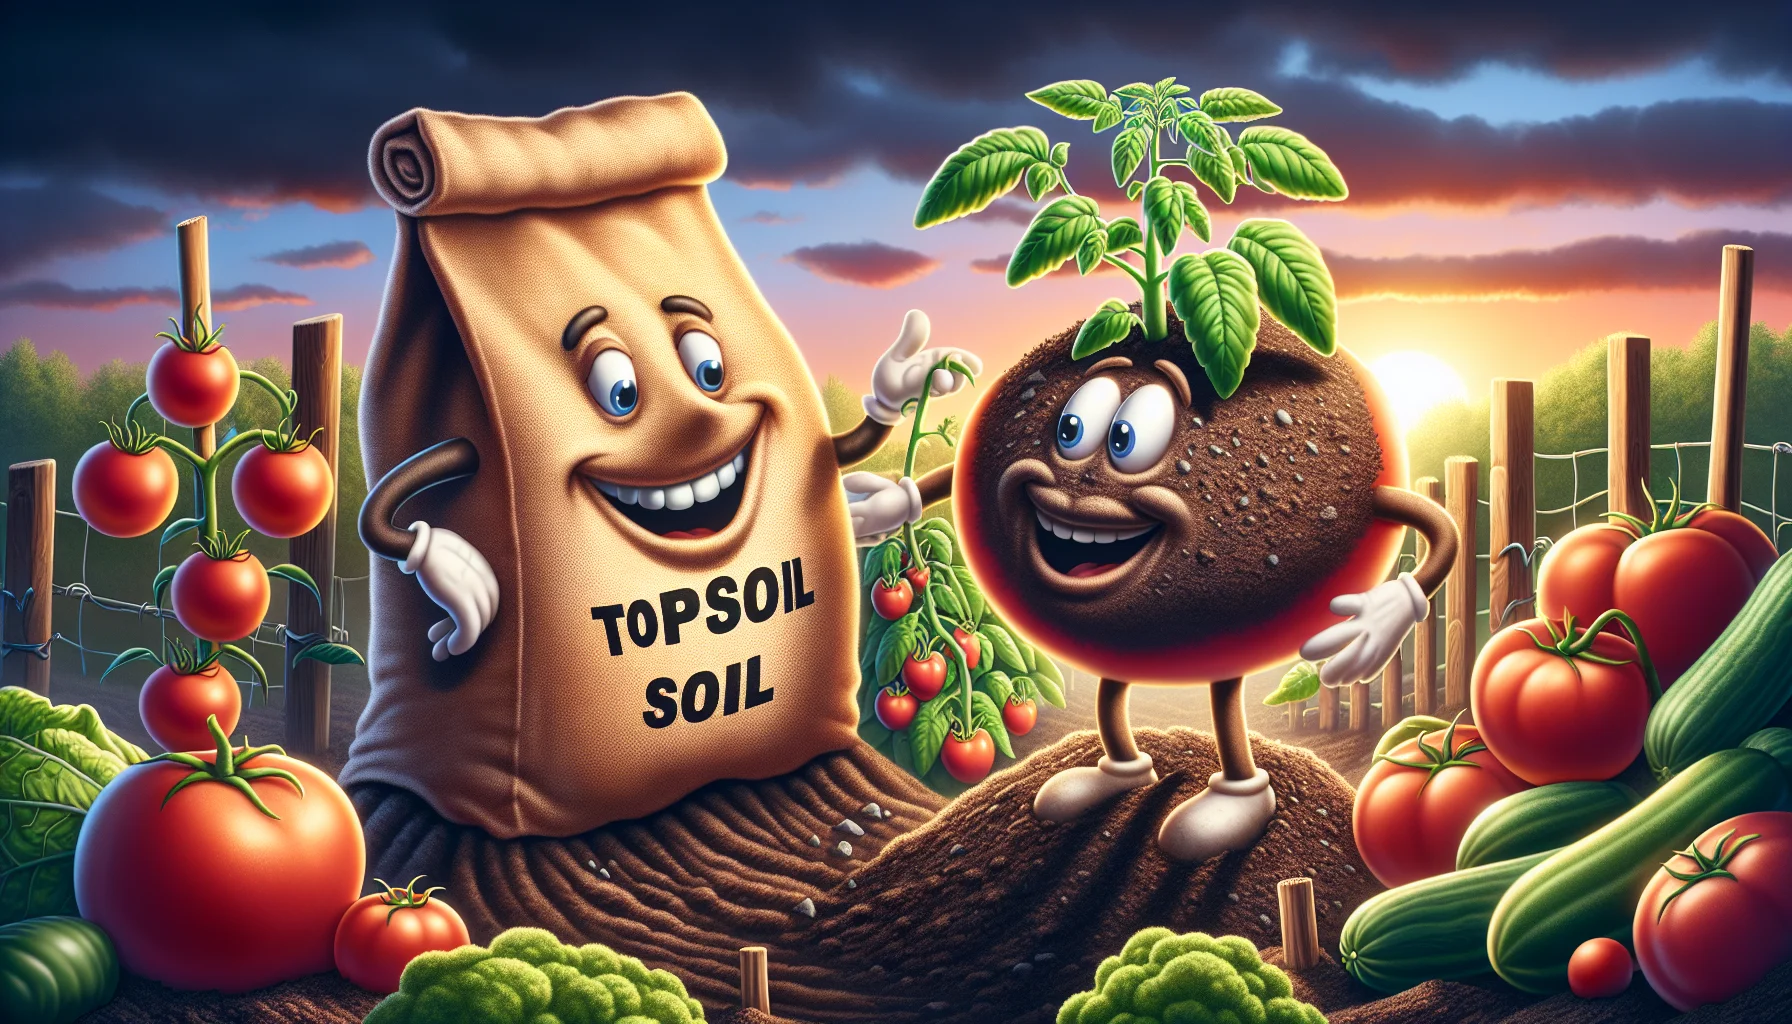 An amusing and naturalistic image featuring two anthropomorphized bags of soil--one marked 'Topsoil' and the other 'Garden Soil'. They are interacting in a garden setting; the 'topsoil' bag is spreading itself across the garden with a confident grin while the 'garden soil' bag admires a large, flourishing tomato plant it has nurtured, with an accomplished smile. Both are surrounded by a variety of lush fruits and vegetables, highlighting the rewards of gardening. The dawn sky signals the start of a fruitful gardening day, adding to the enticing atmosphere.